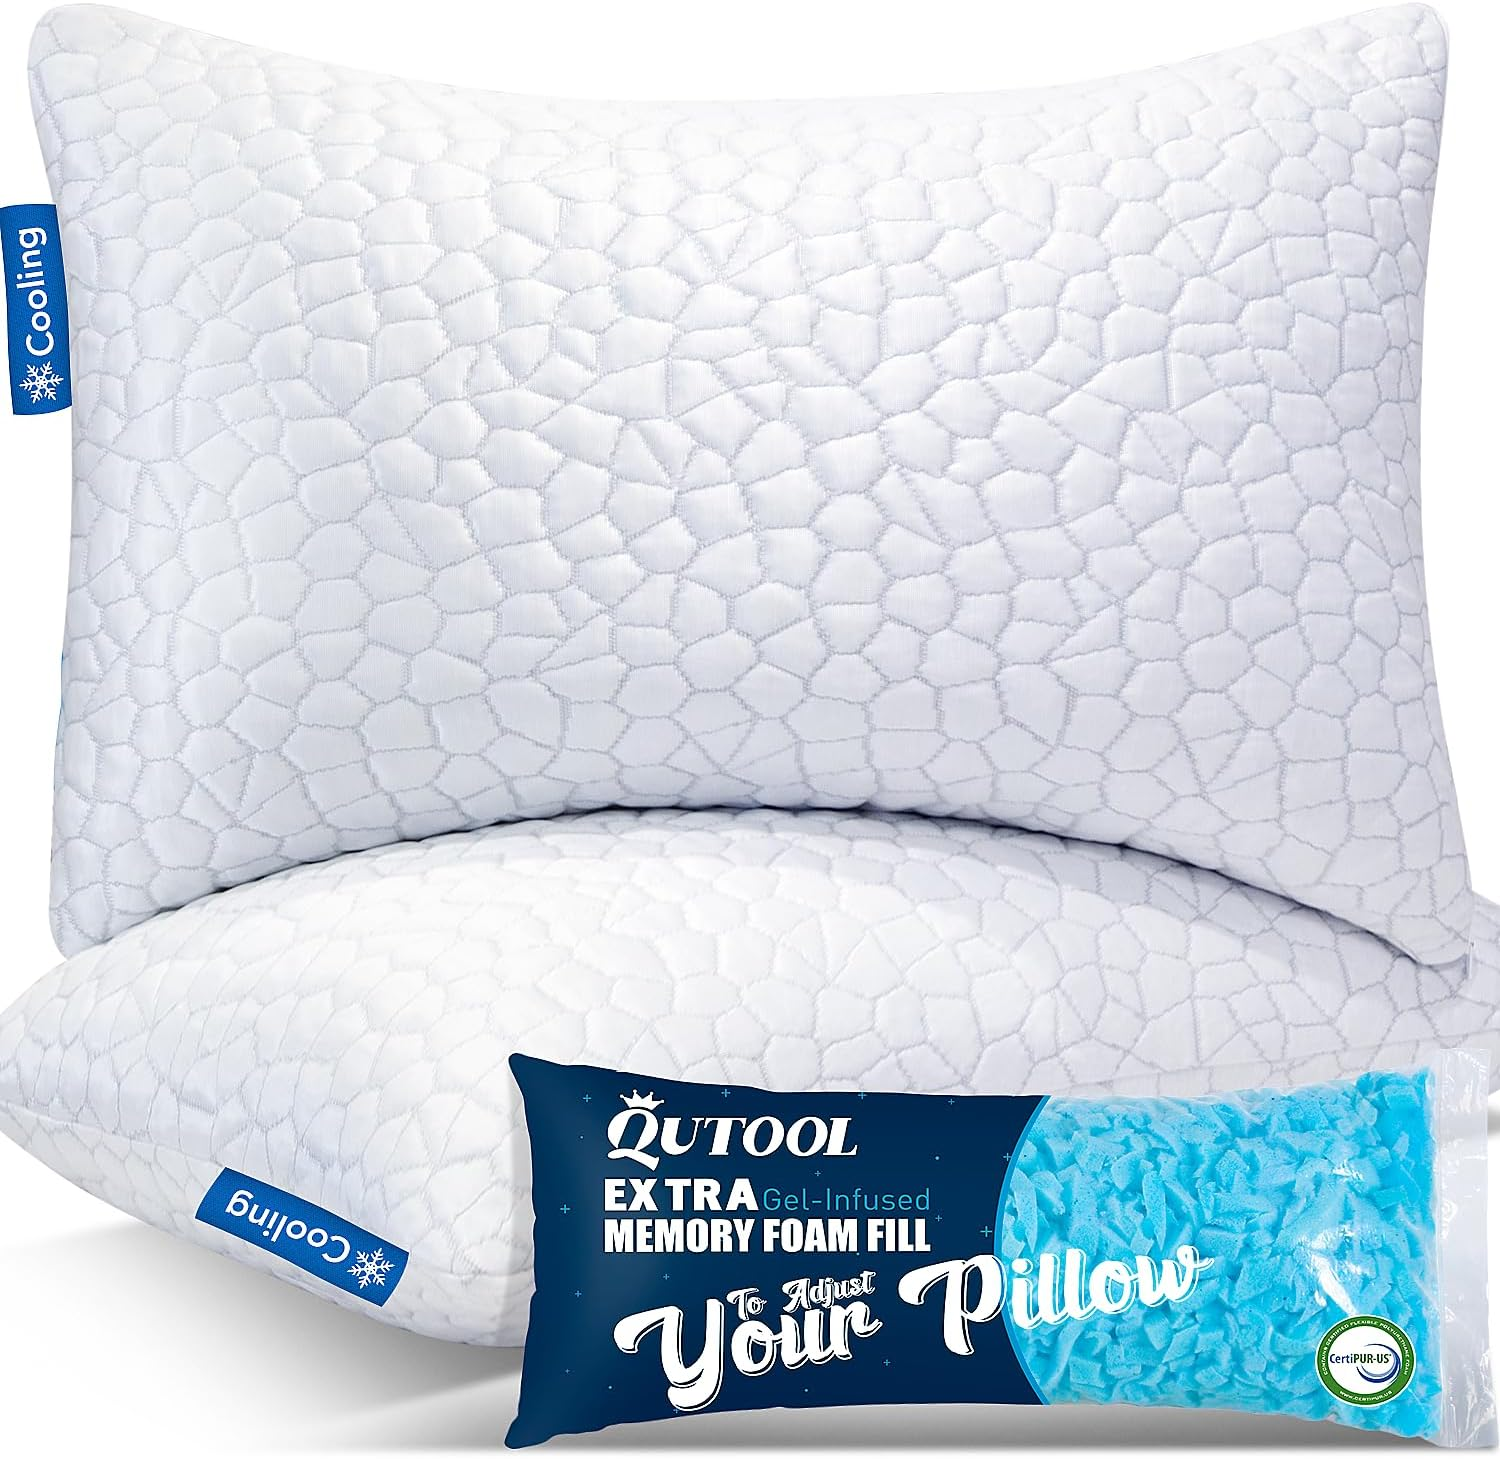 inight Memory Foam Pillow, Cooling Pillow Memory Foam, Soft Memory Foam  Pillows for Back Sleepers & Side Sleepers Pillows- Standard Size, 5 inches  Loft 